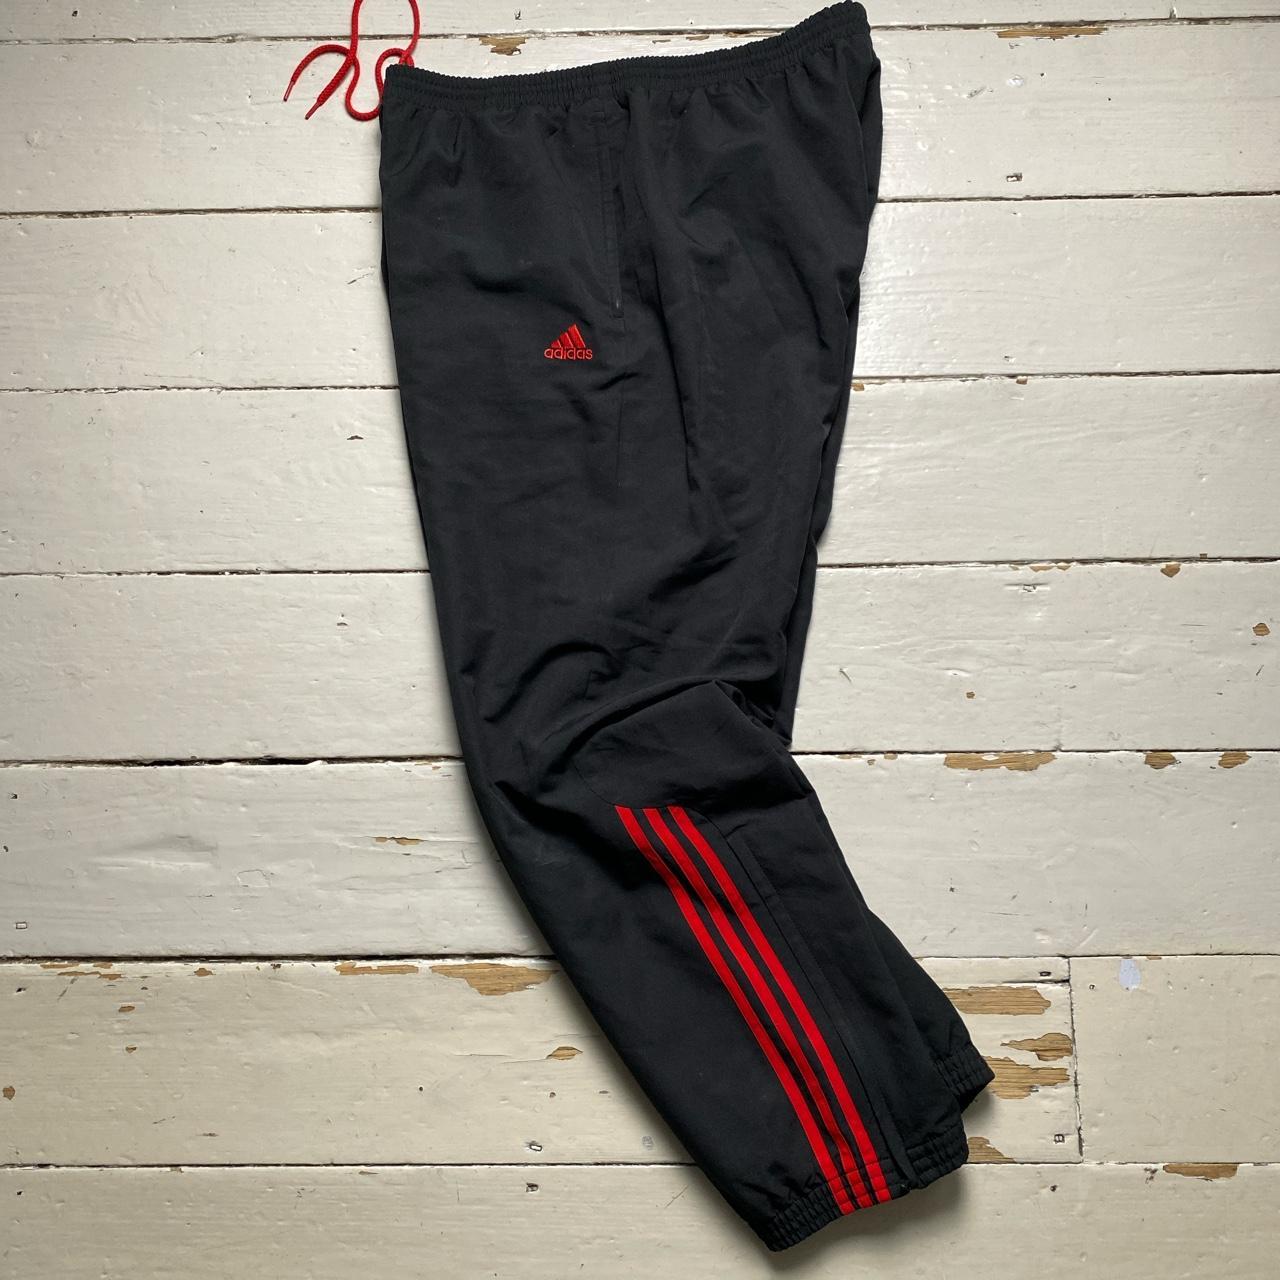 Adidas Black and Red Stripe Baggy Shell Trackpant Bottoms